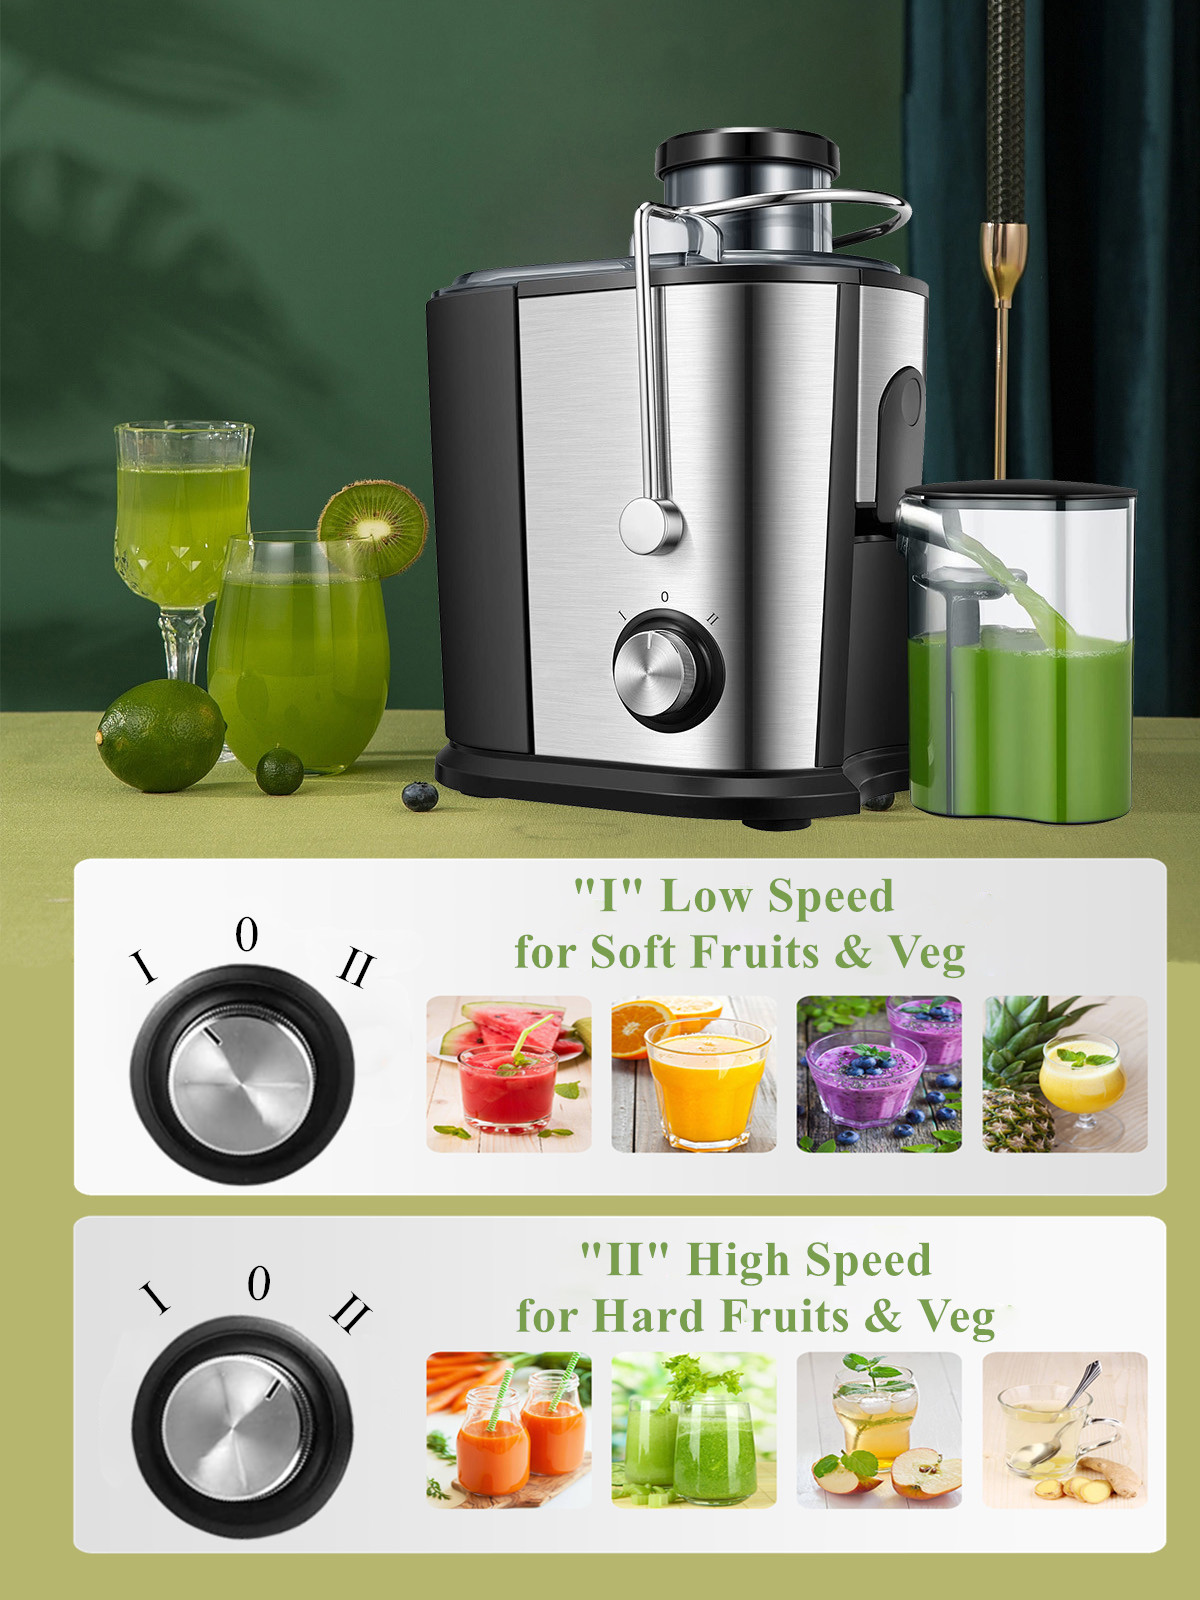 Juilsit Juicer Easy to Clean, 3 " Juice Extractor BPA Free Compact Fruits & Vegetables Juicer, Dual Speed Centrifugal Juicer with Non-Drip Function, Stainless Steel Juicers - image 3 of 8